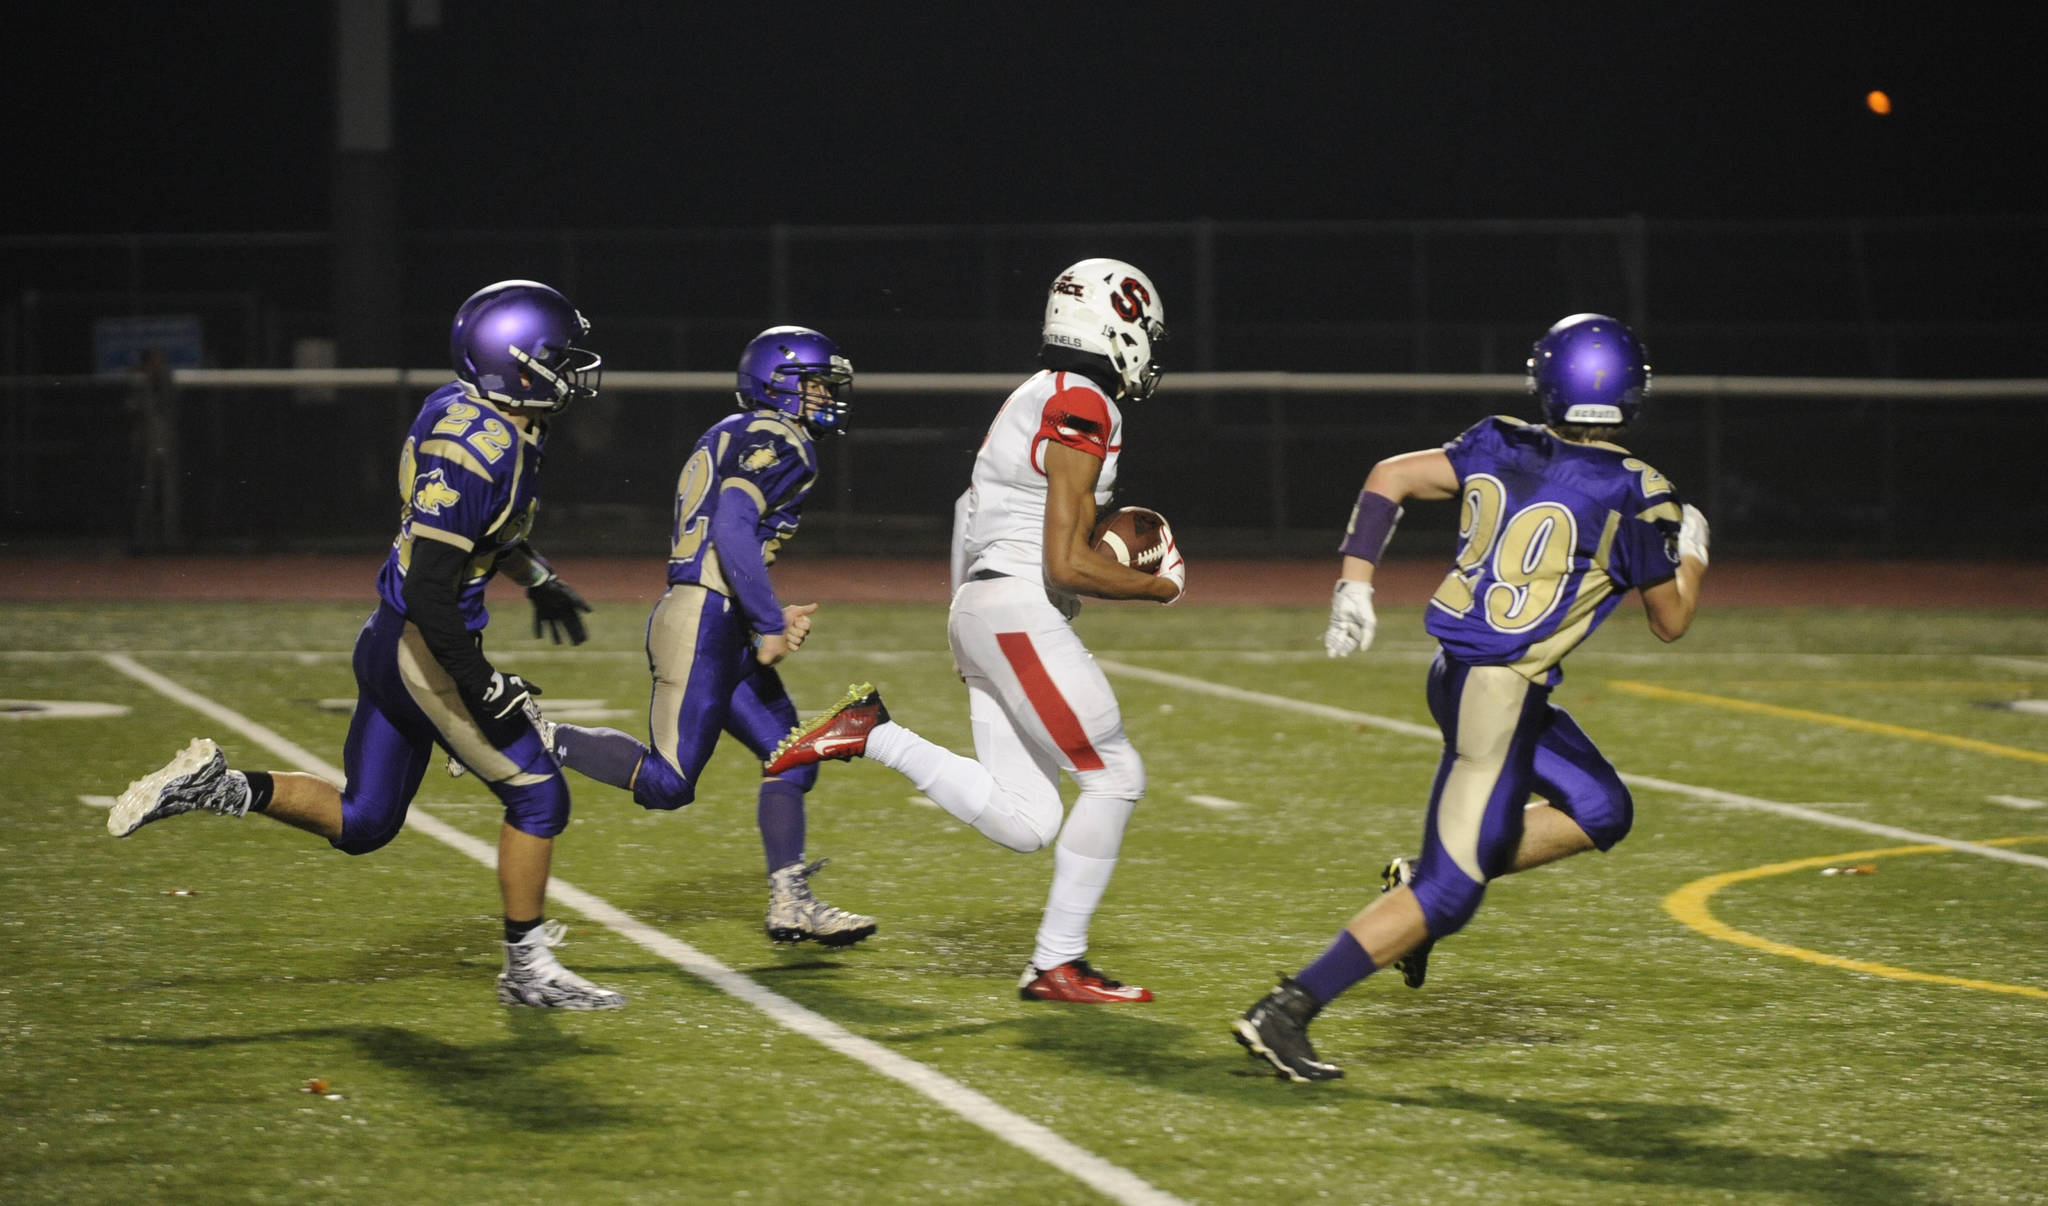 Steilacoom sophomore receiver Emeka Egbuka (2) races through the Sequim defense for one of his three first-half touchdown receptions in a 49-12 rout in Silverdale on Nov. 9. Defending the play are Wolves’ Walker Ward (22), Kyler Rollness (12) and Joey Oliver (29). Sequim Gazette photo by Michael Dashiell